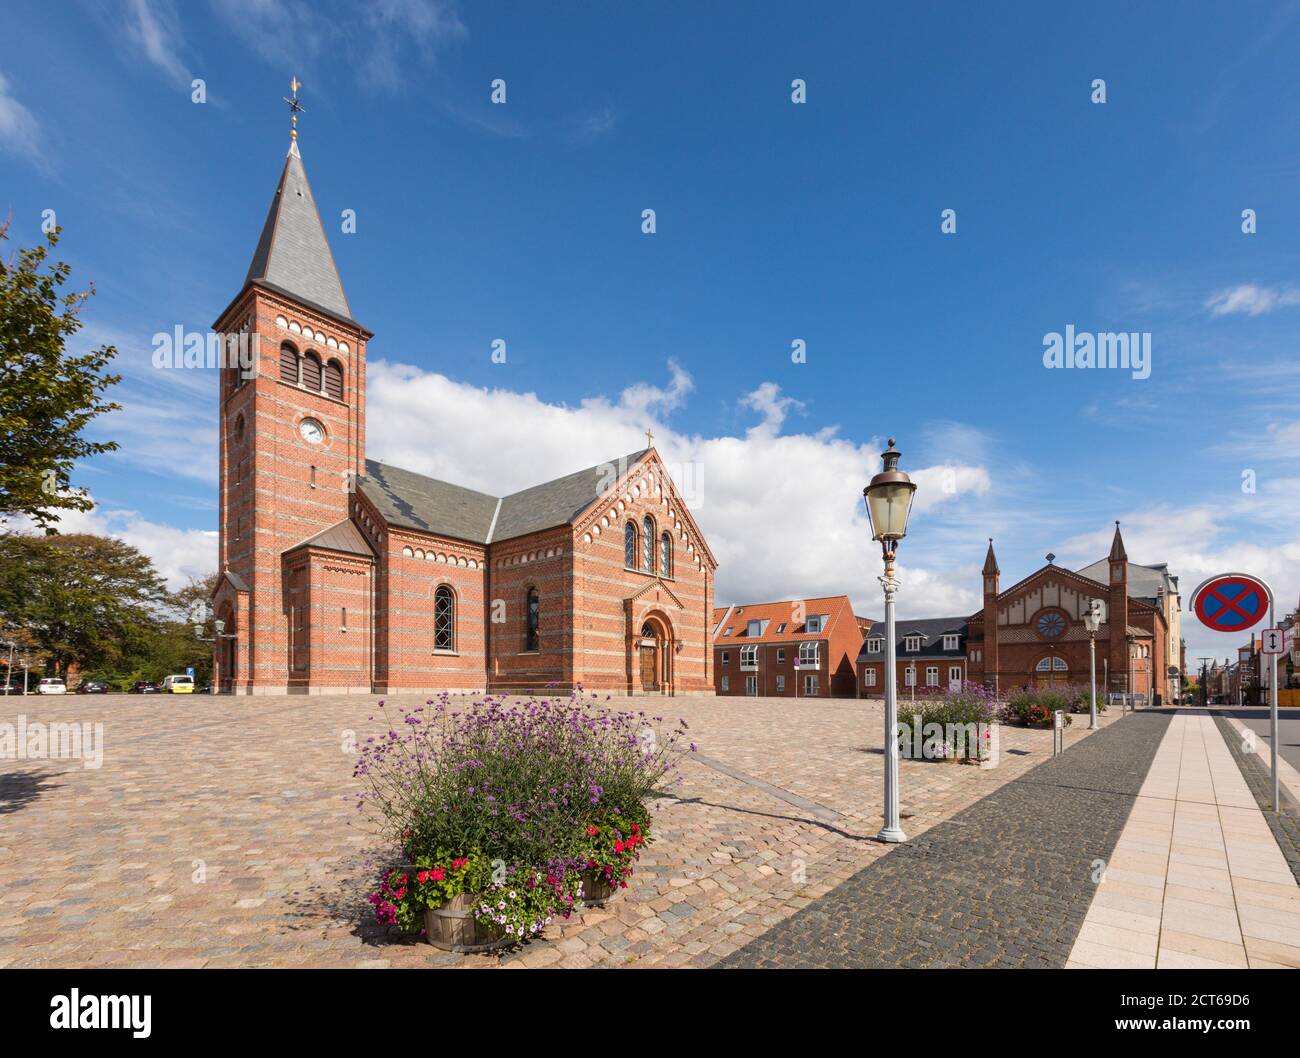 Church square with Church of our Saviour or Vor Frelsers Kirke at Esbjerg, Denmark Stock Photo